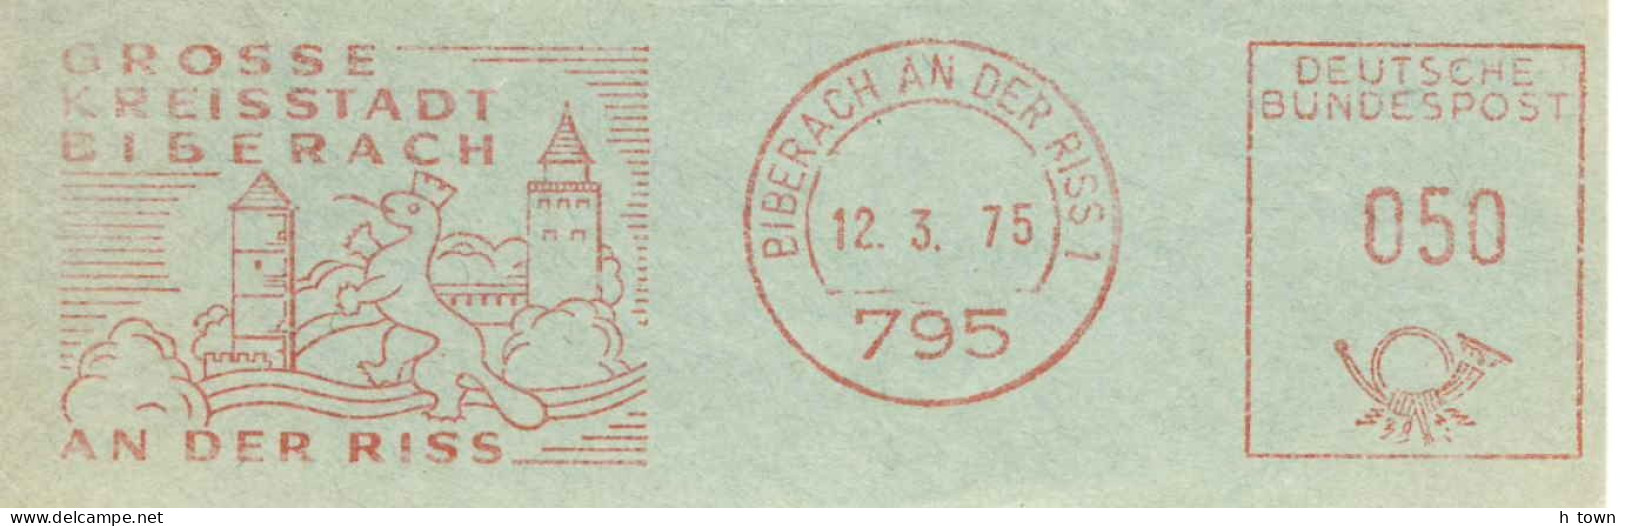 954  Castor: Ema D'Allemagne, 1975 - Beaver Meter Stamp From Biberach, Germany - Rodents